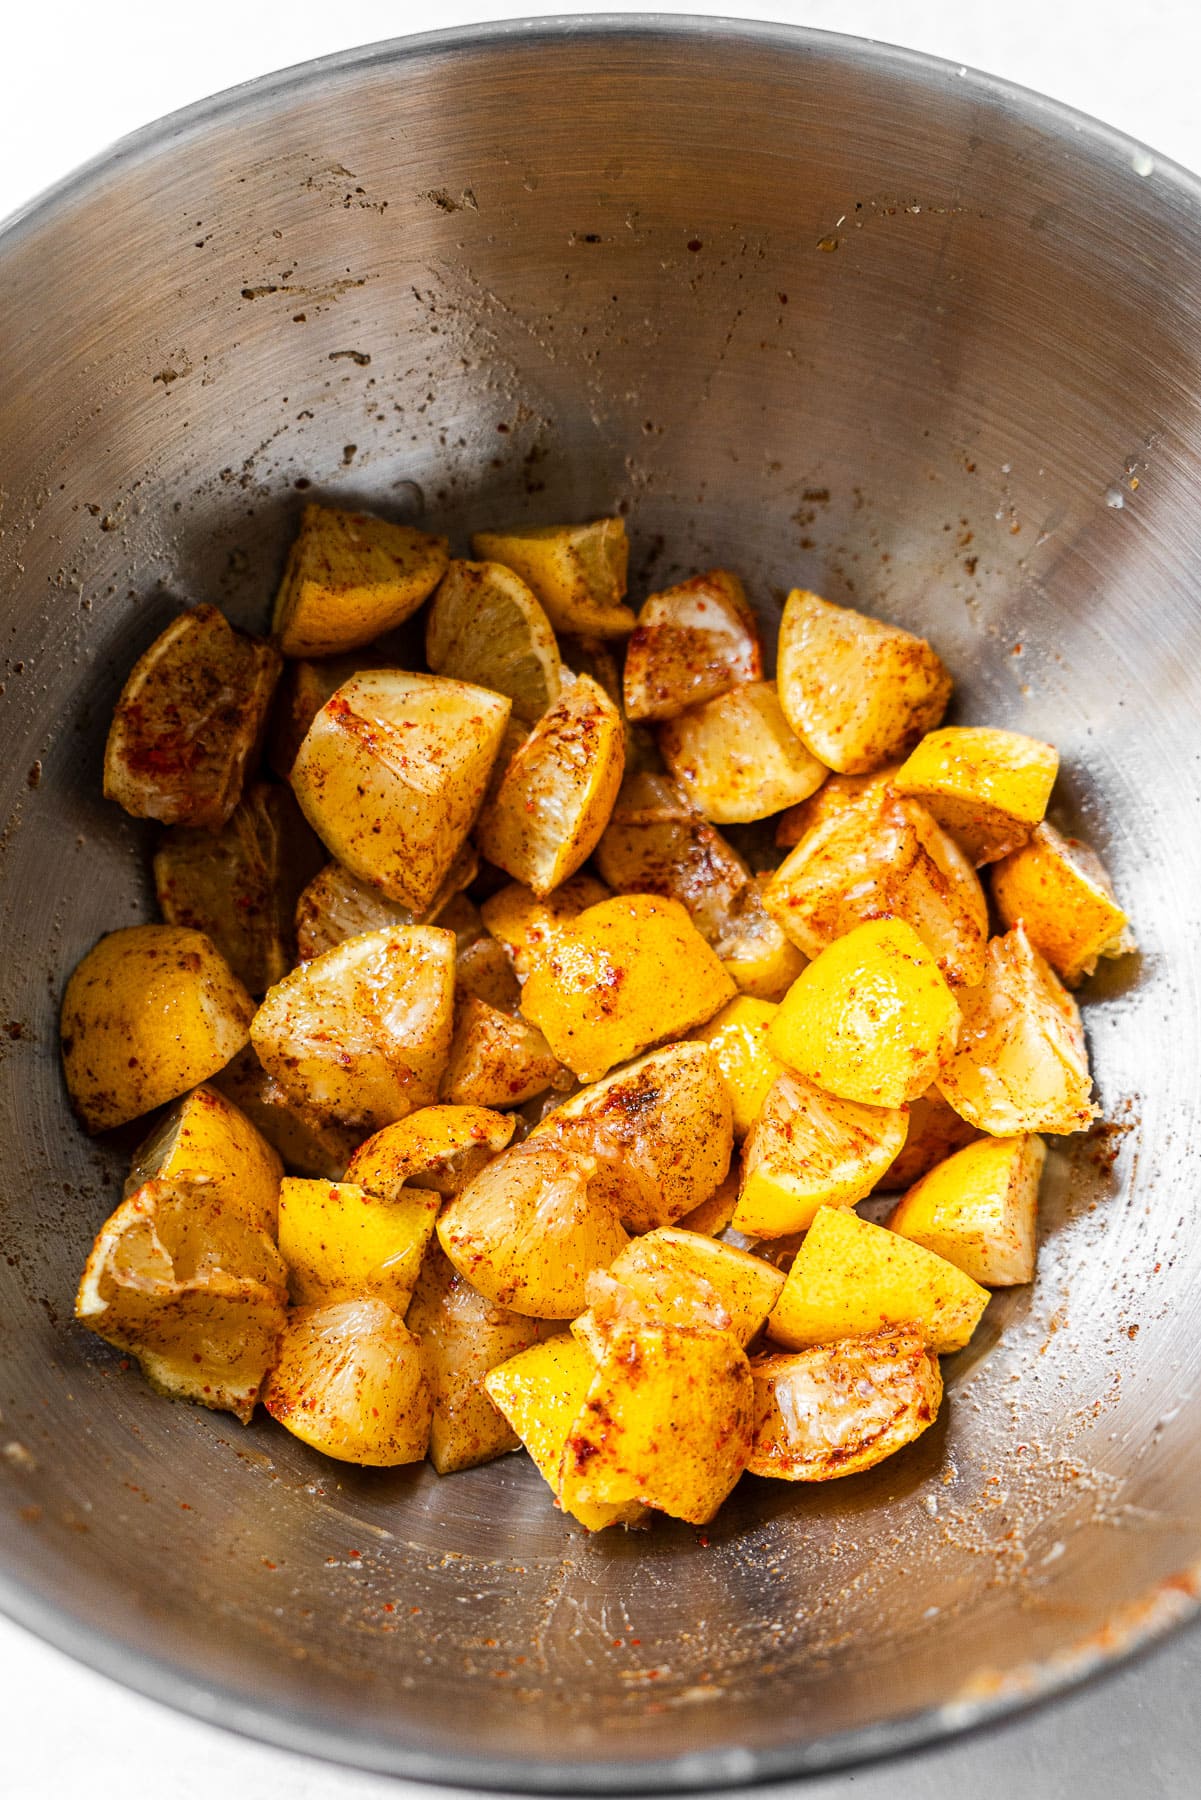 Quartered fresh lemons tossed in spices in a bowl.